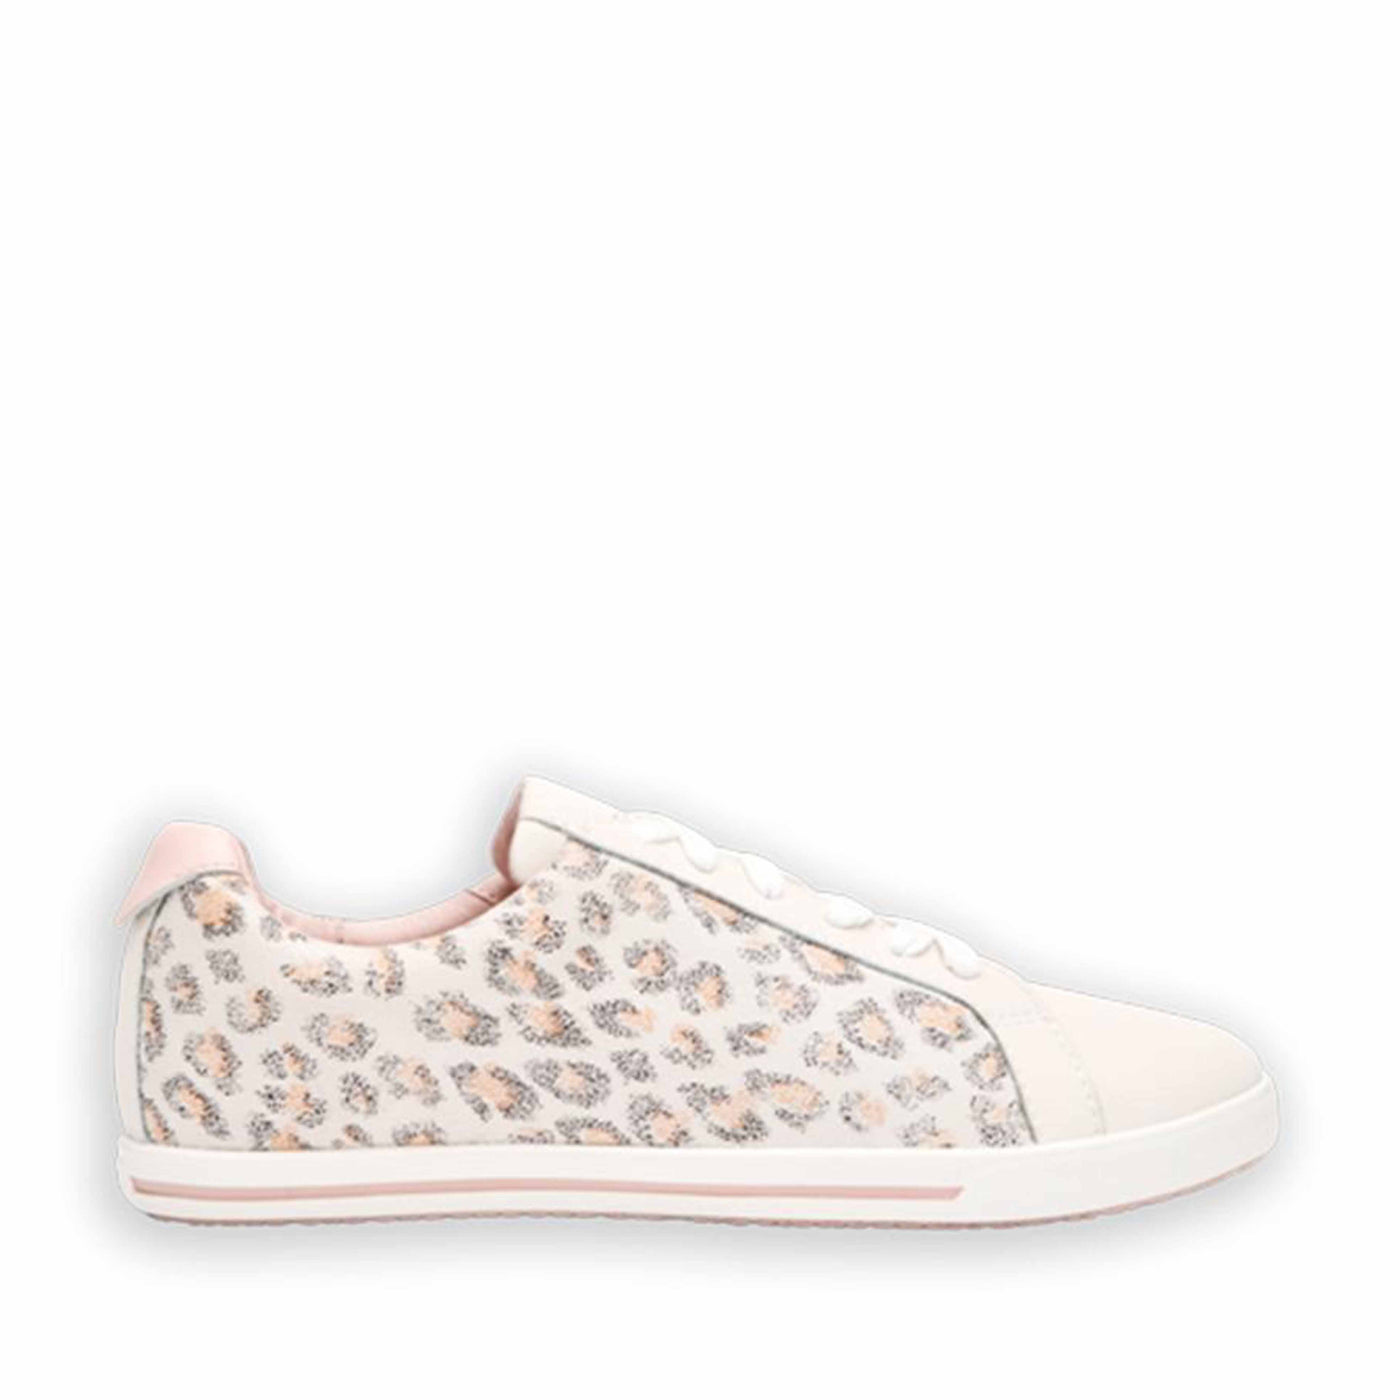 FRANKiE4 LUCY II CHALK LEOPARD - FrankiE4 Women sneakers - Collective Shoes 